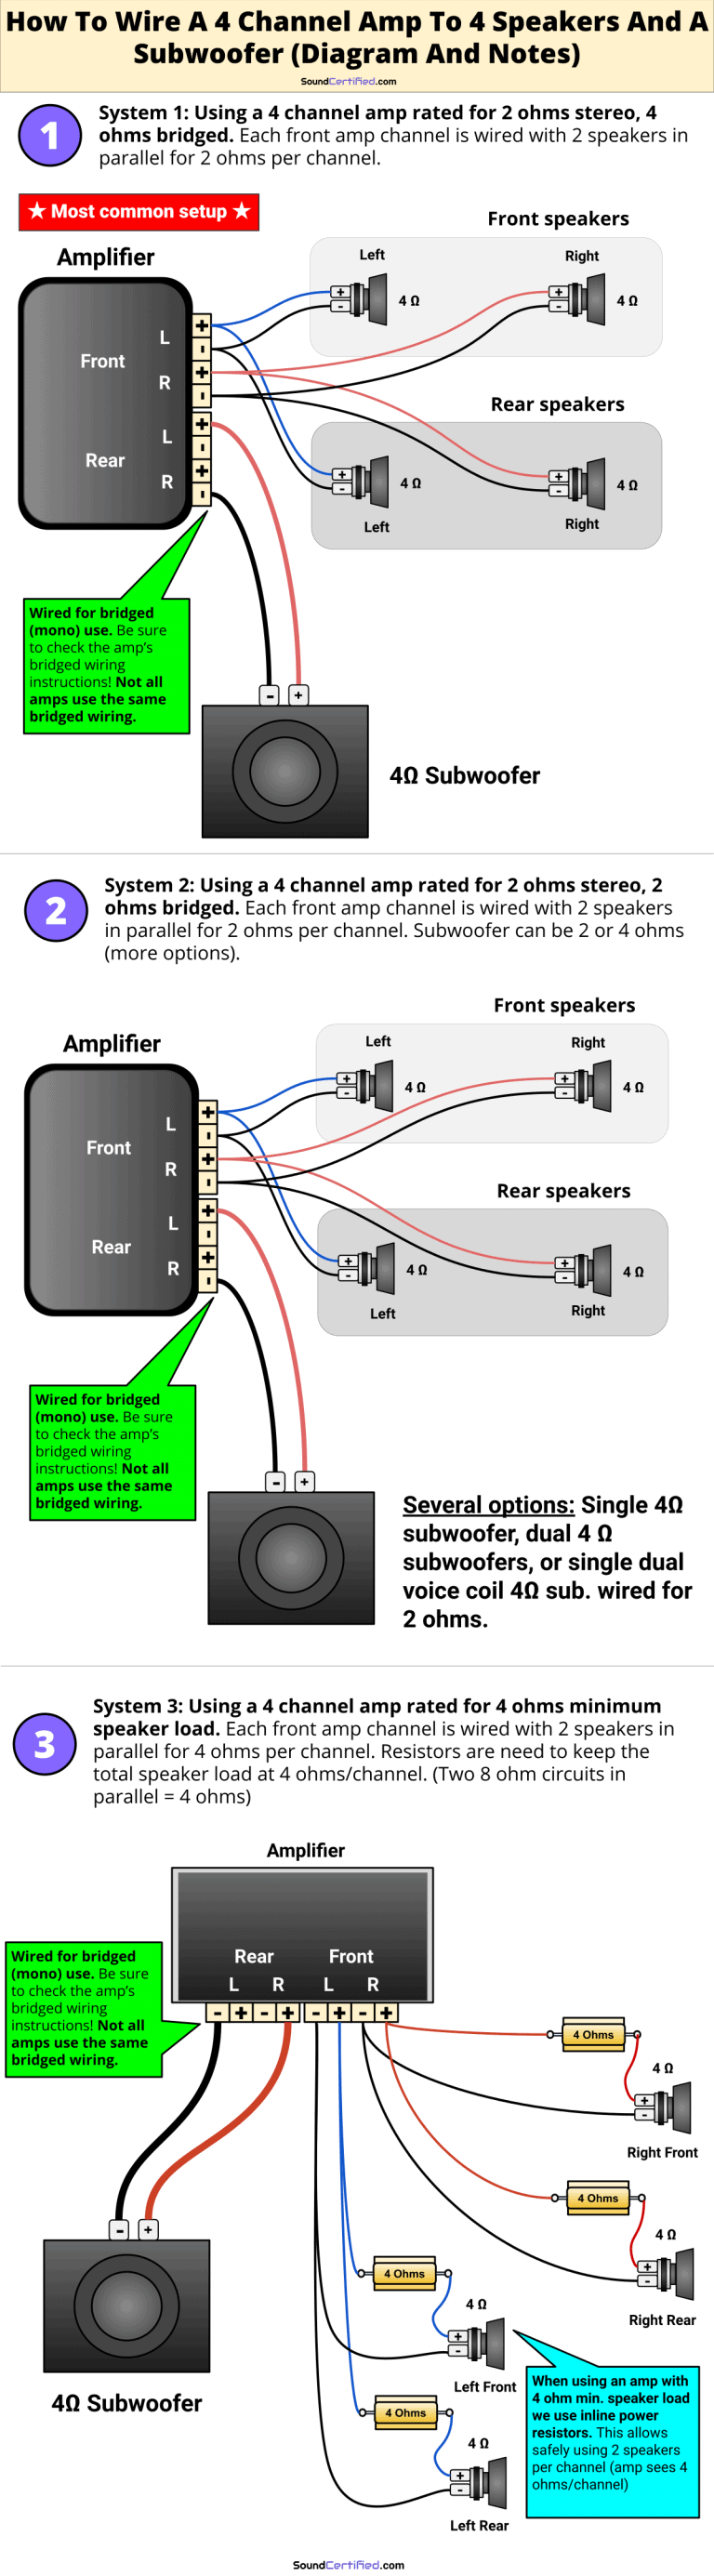 How To Wire A 4 Channel Amp To 4 Speakers And A Sub A Detailed Guide